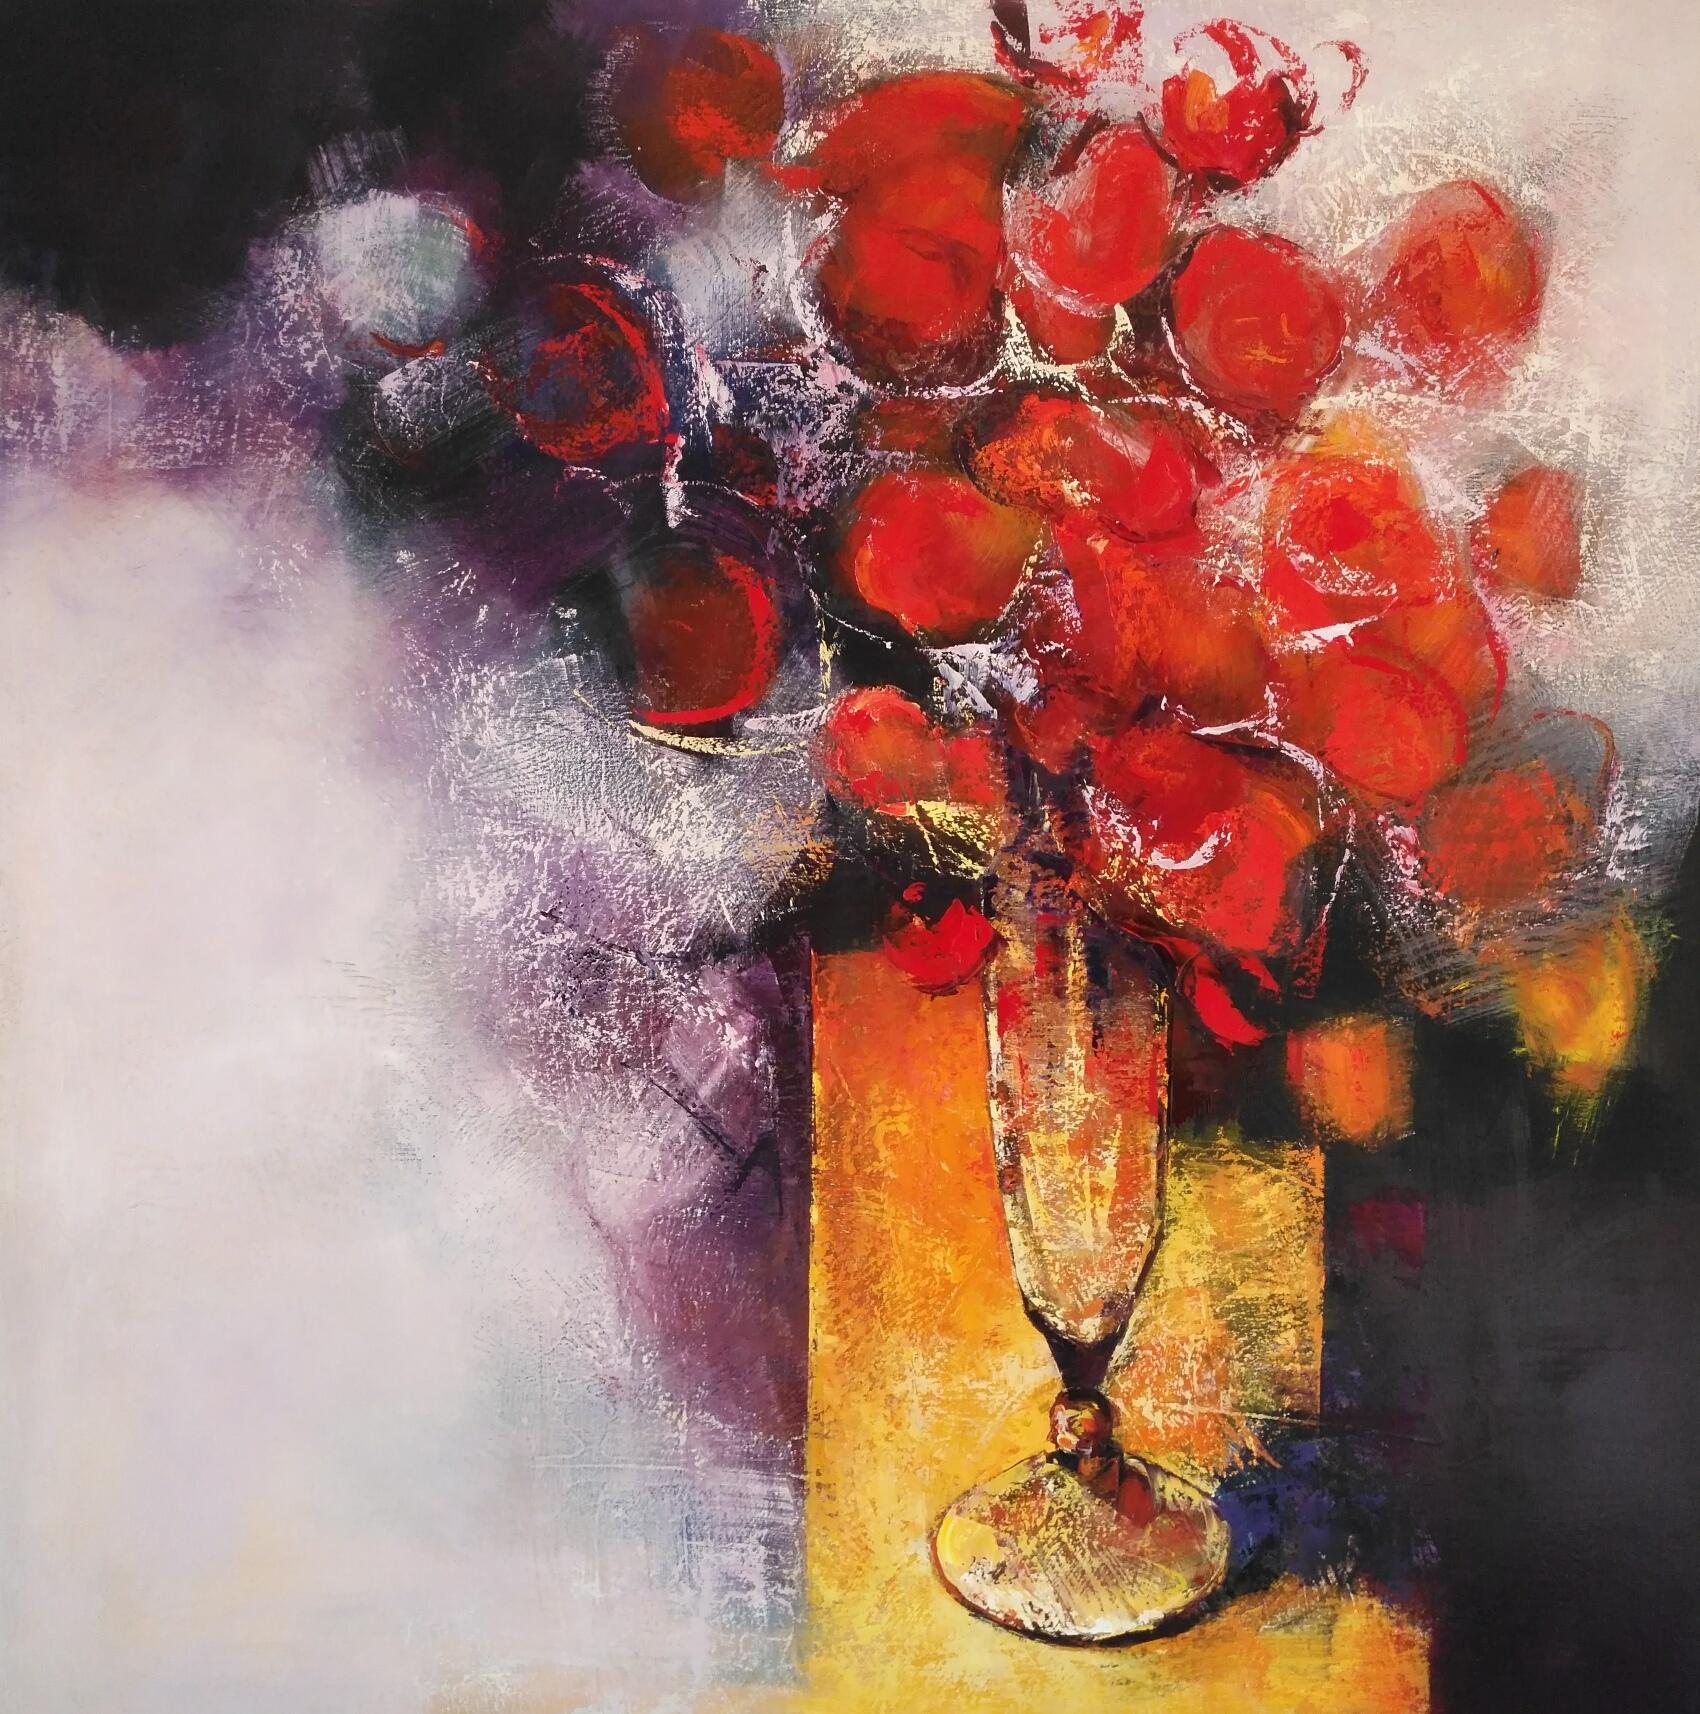 La Post - 21st Century, Contemporary, Still Life, Oil Painting, Red Flowers